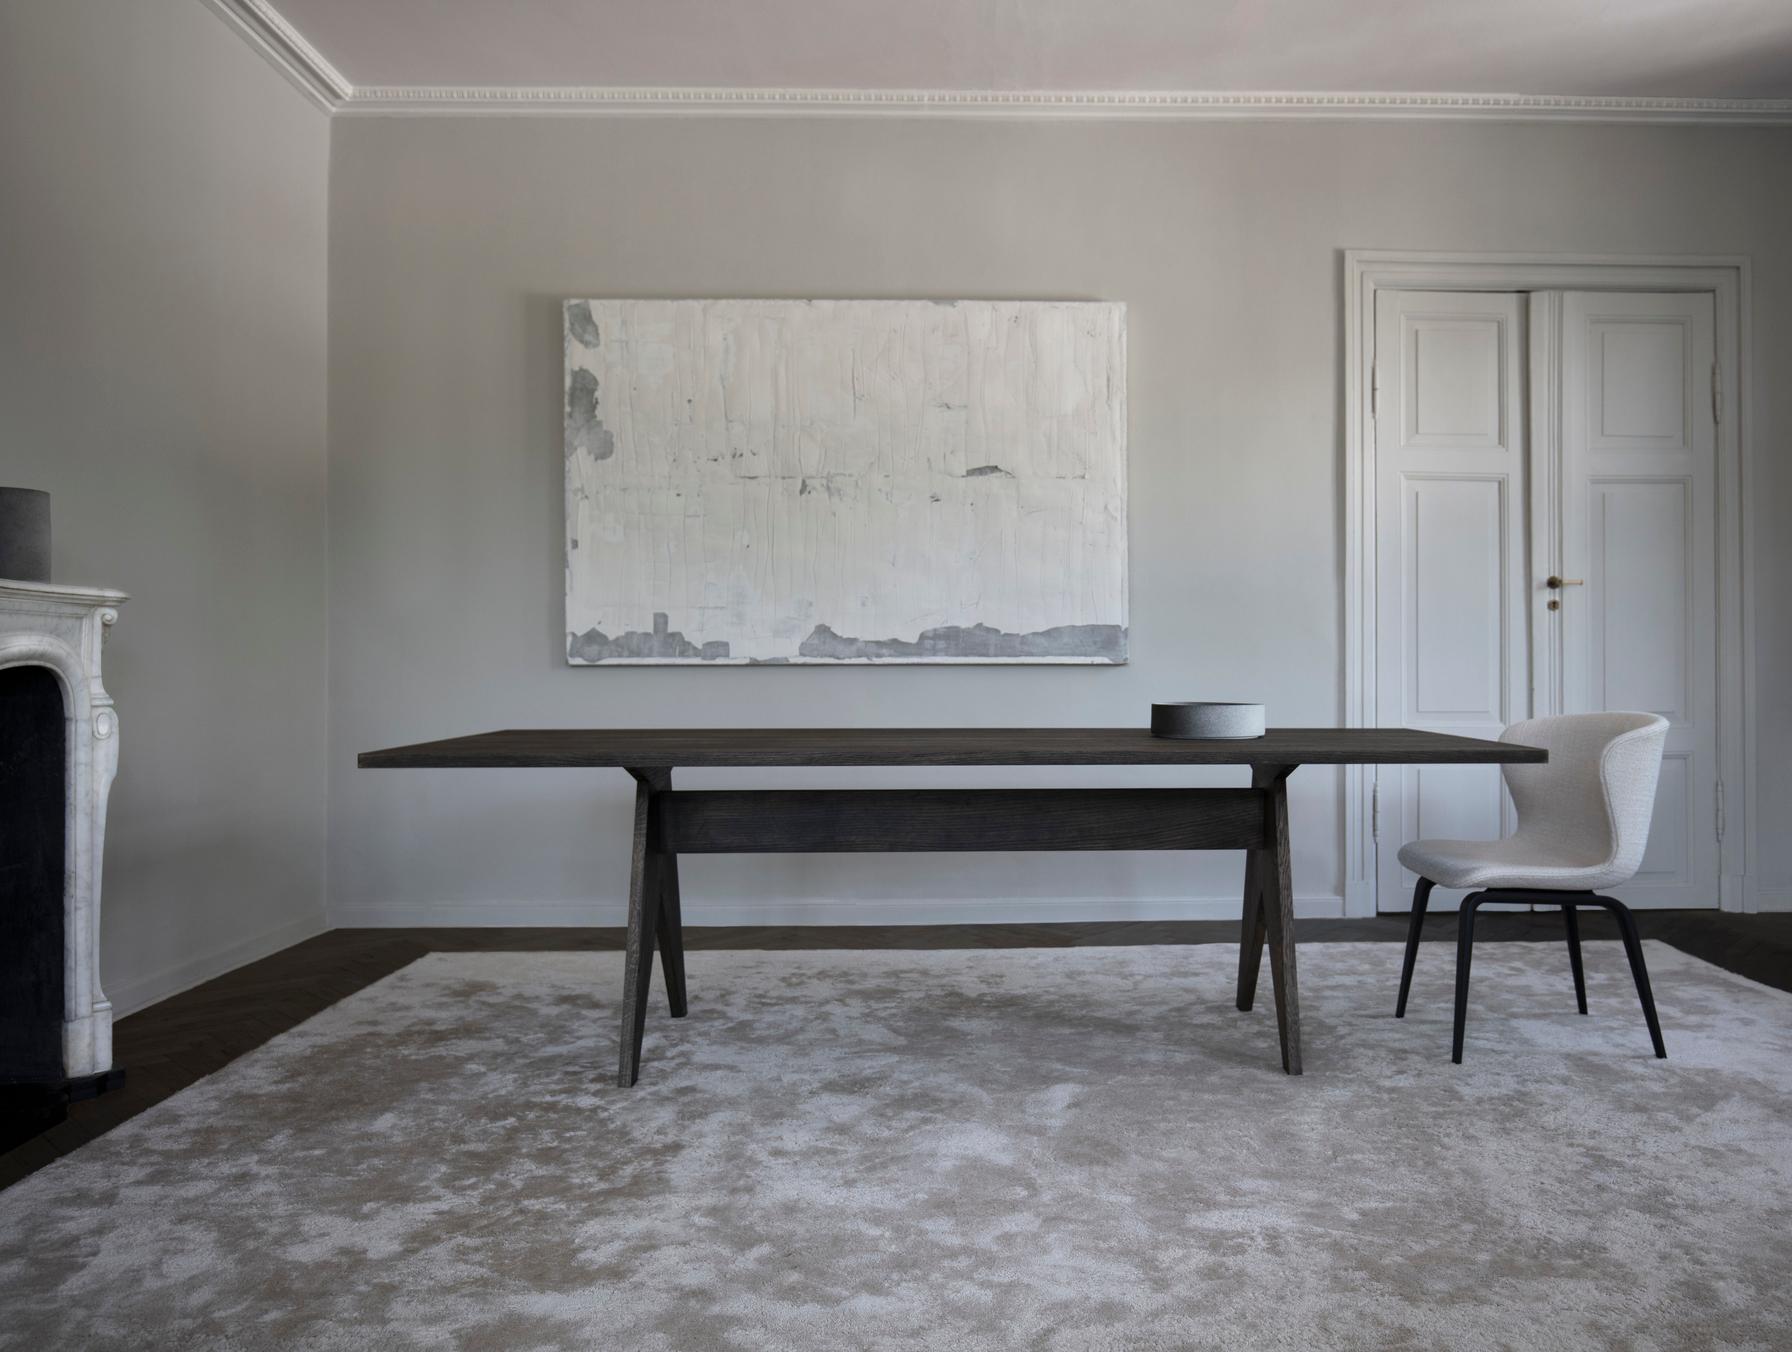 Dining room table 'POSE' by Friends & Founders

Designer : IDA LINEA HILDEBRAND

Model on picture:
- Dimensions: H. 75 x 250 x 95 cm
- Wood finish: Smoked oak

Table featured in solid wood with a rectangular top. Available in solid oak with